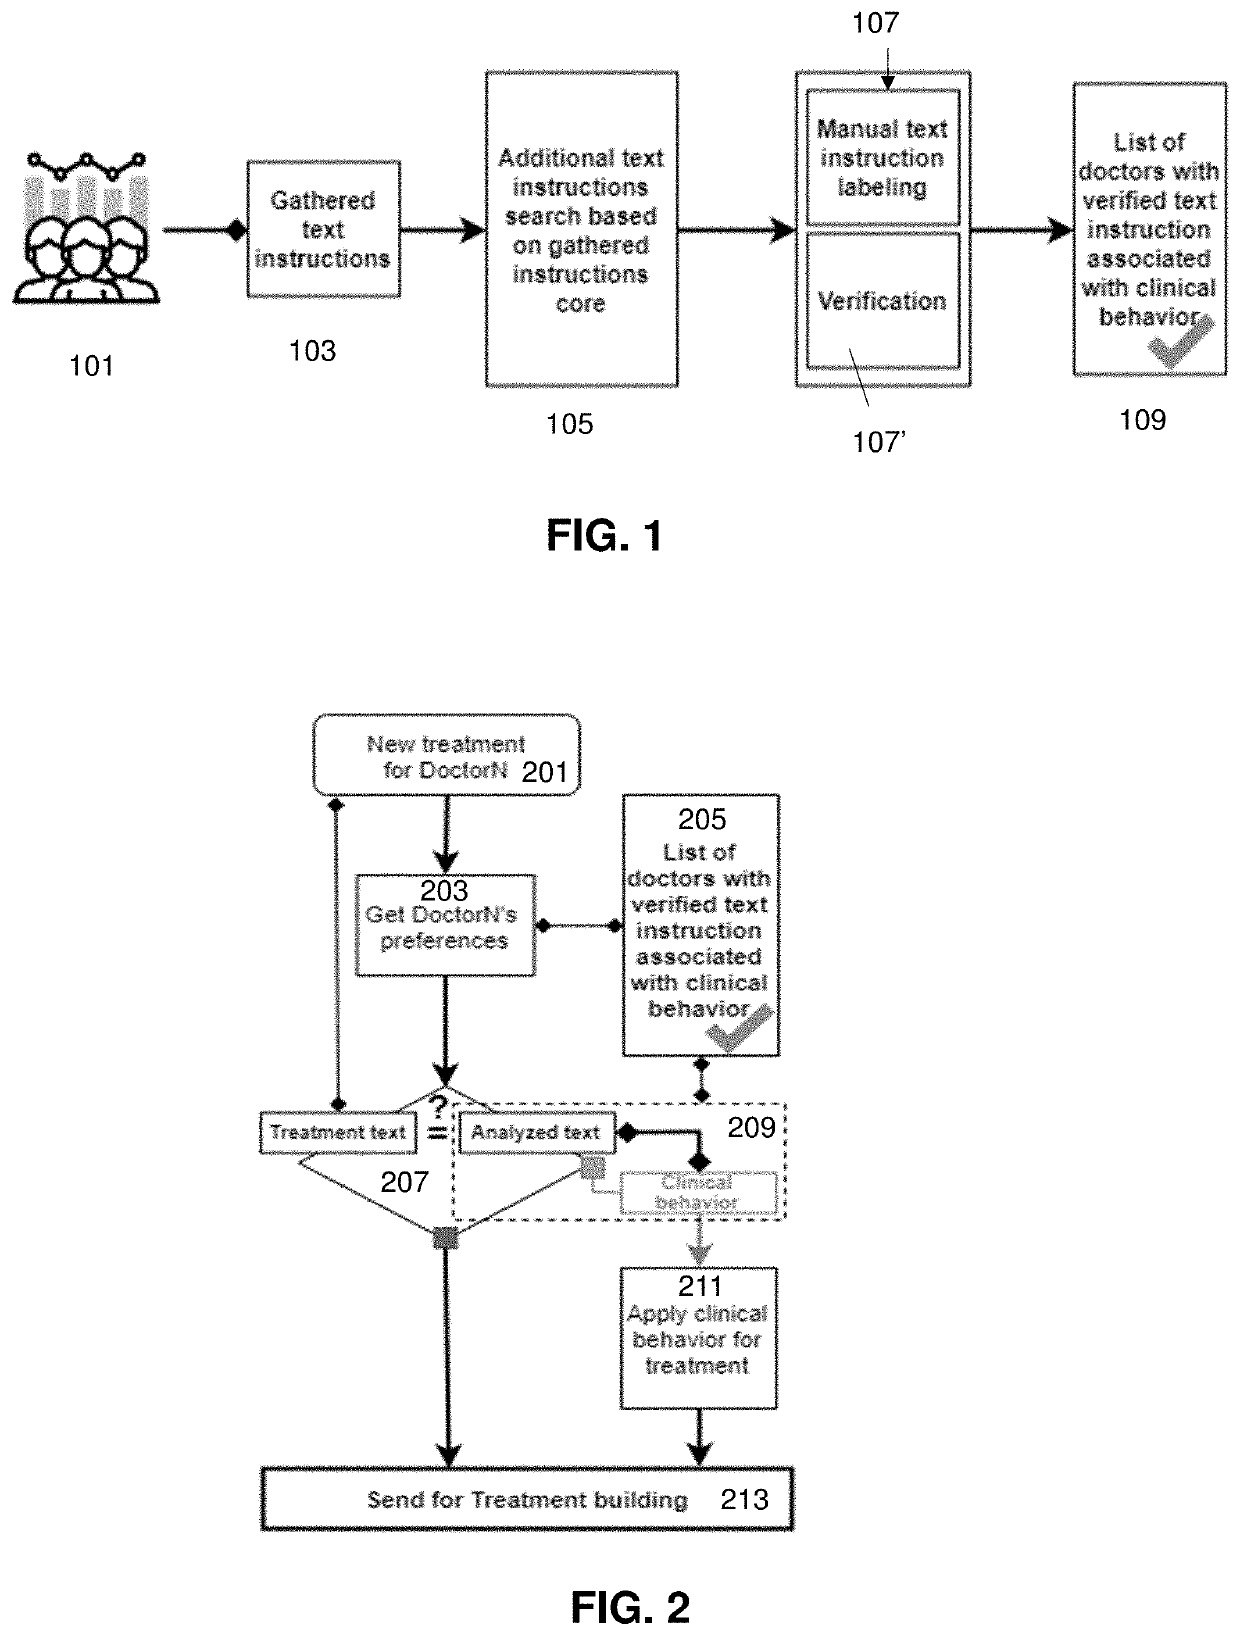 Automatic application of doctor's preferences workflow using statistical preference analysis